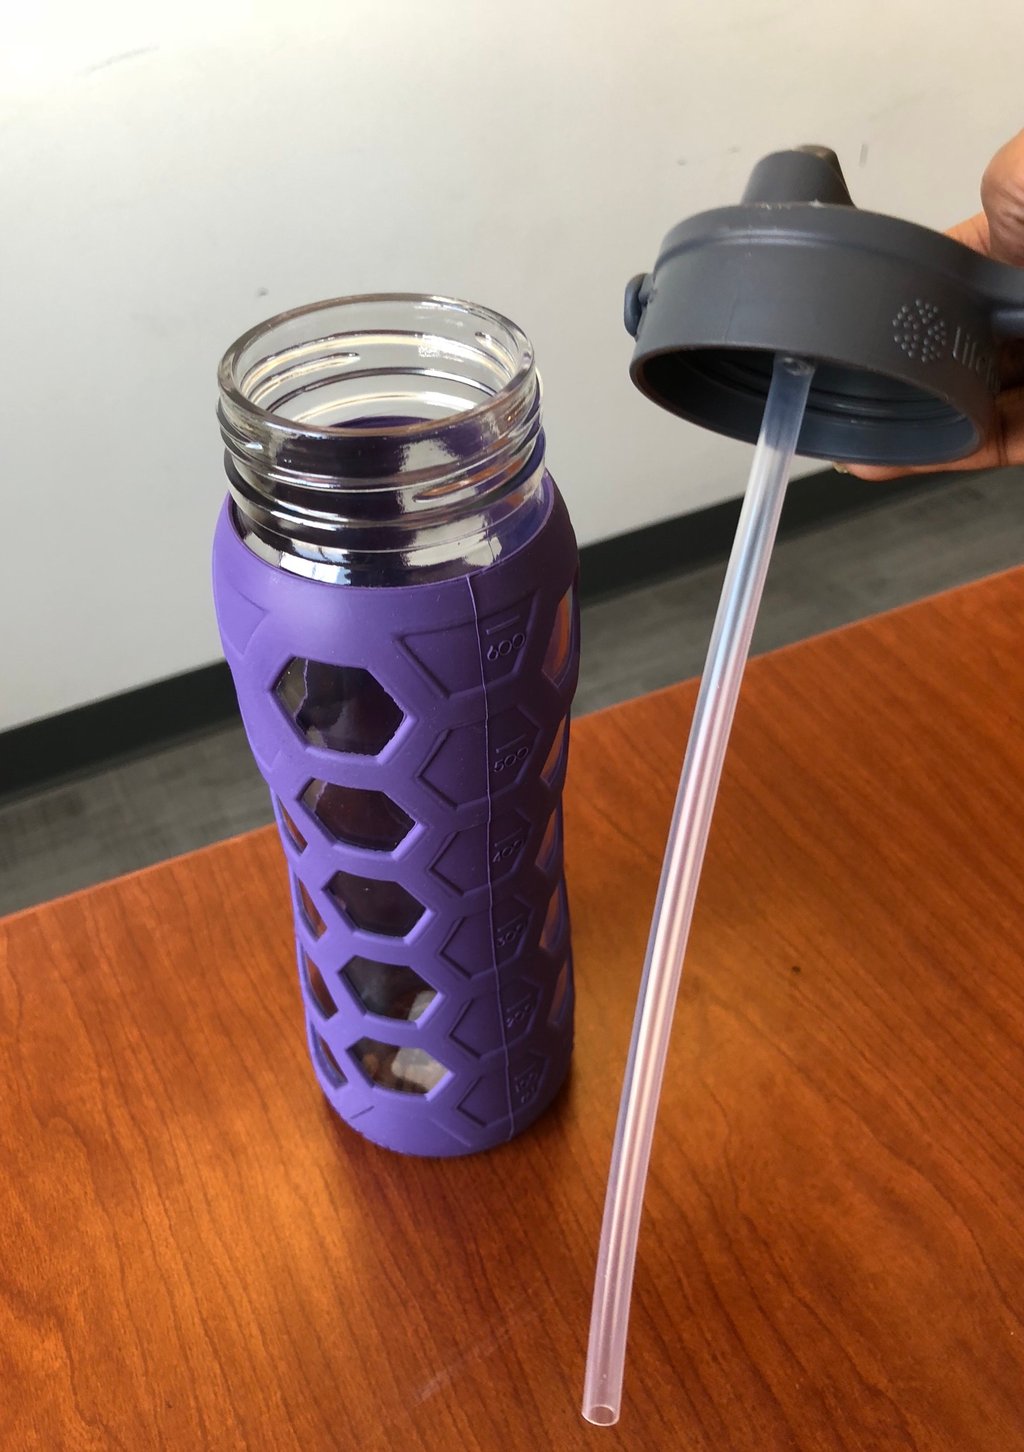 The spout and straw can be taken apart for cleaning. This bottle is a , Target Water Bottles